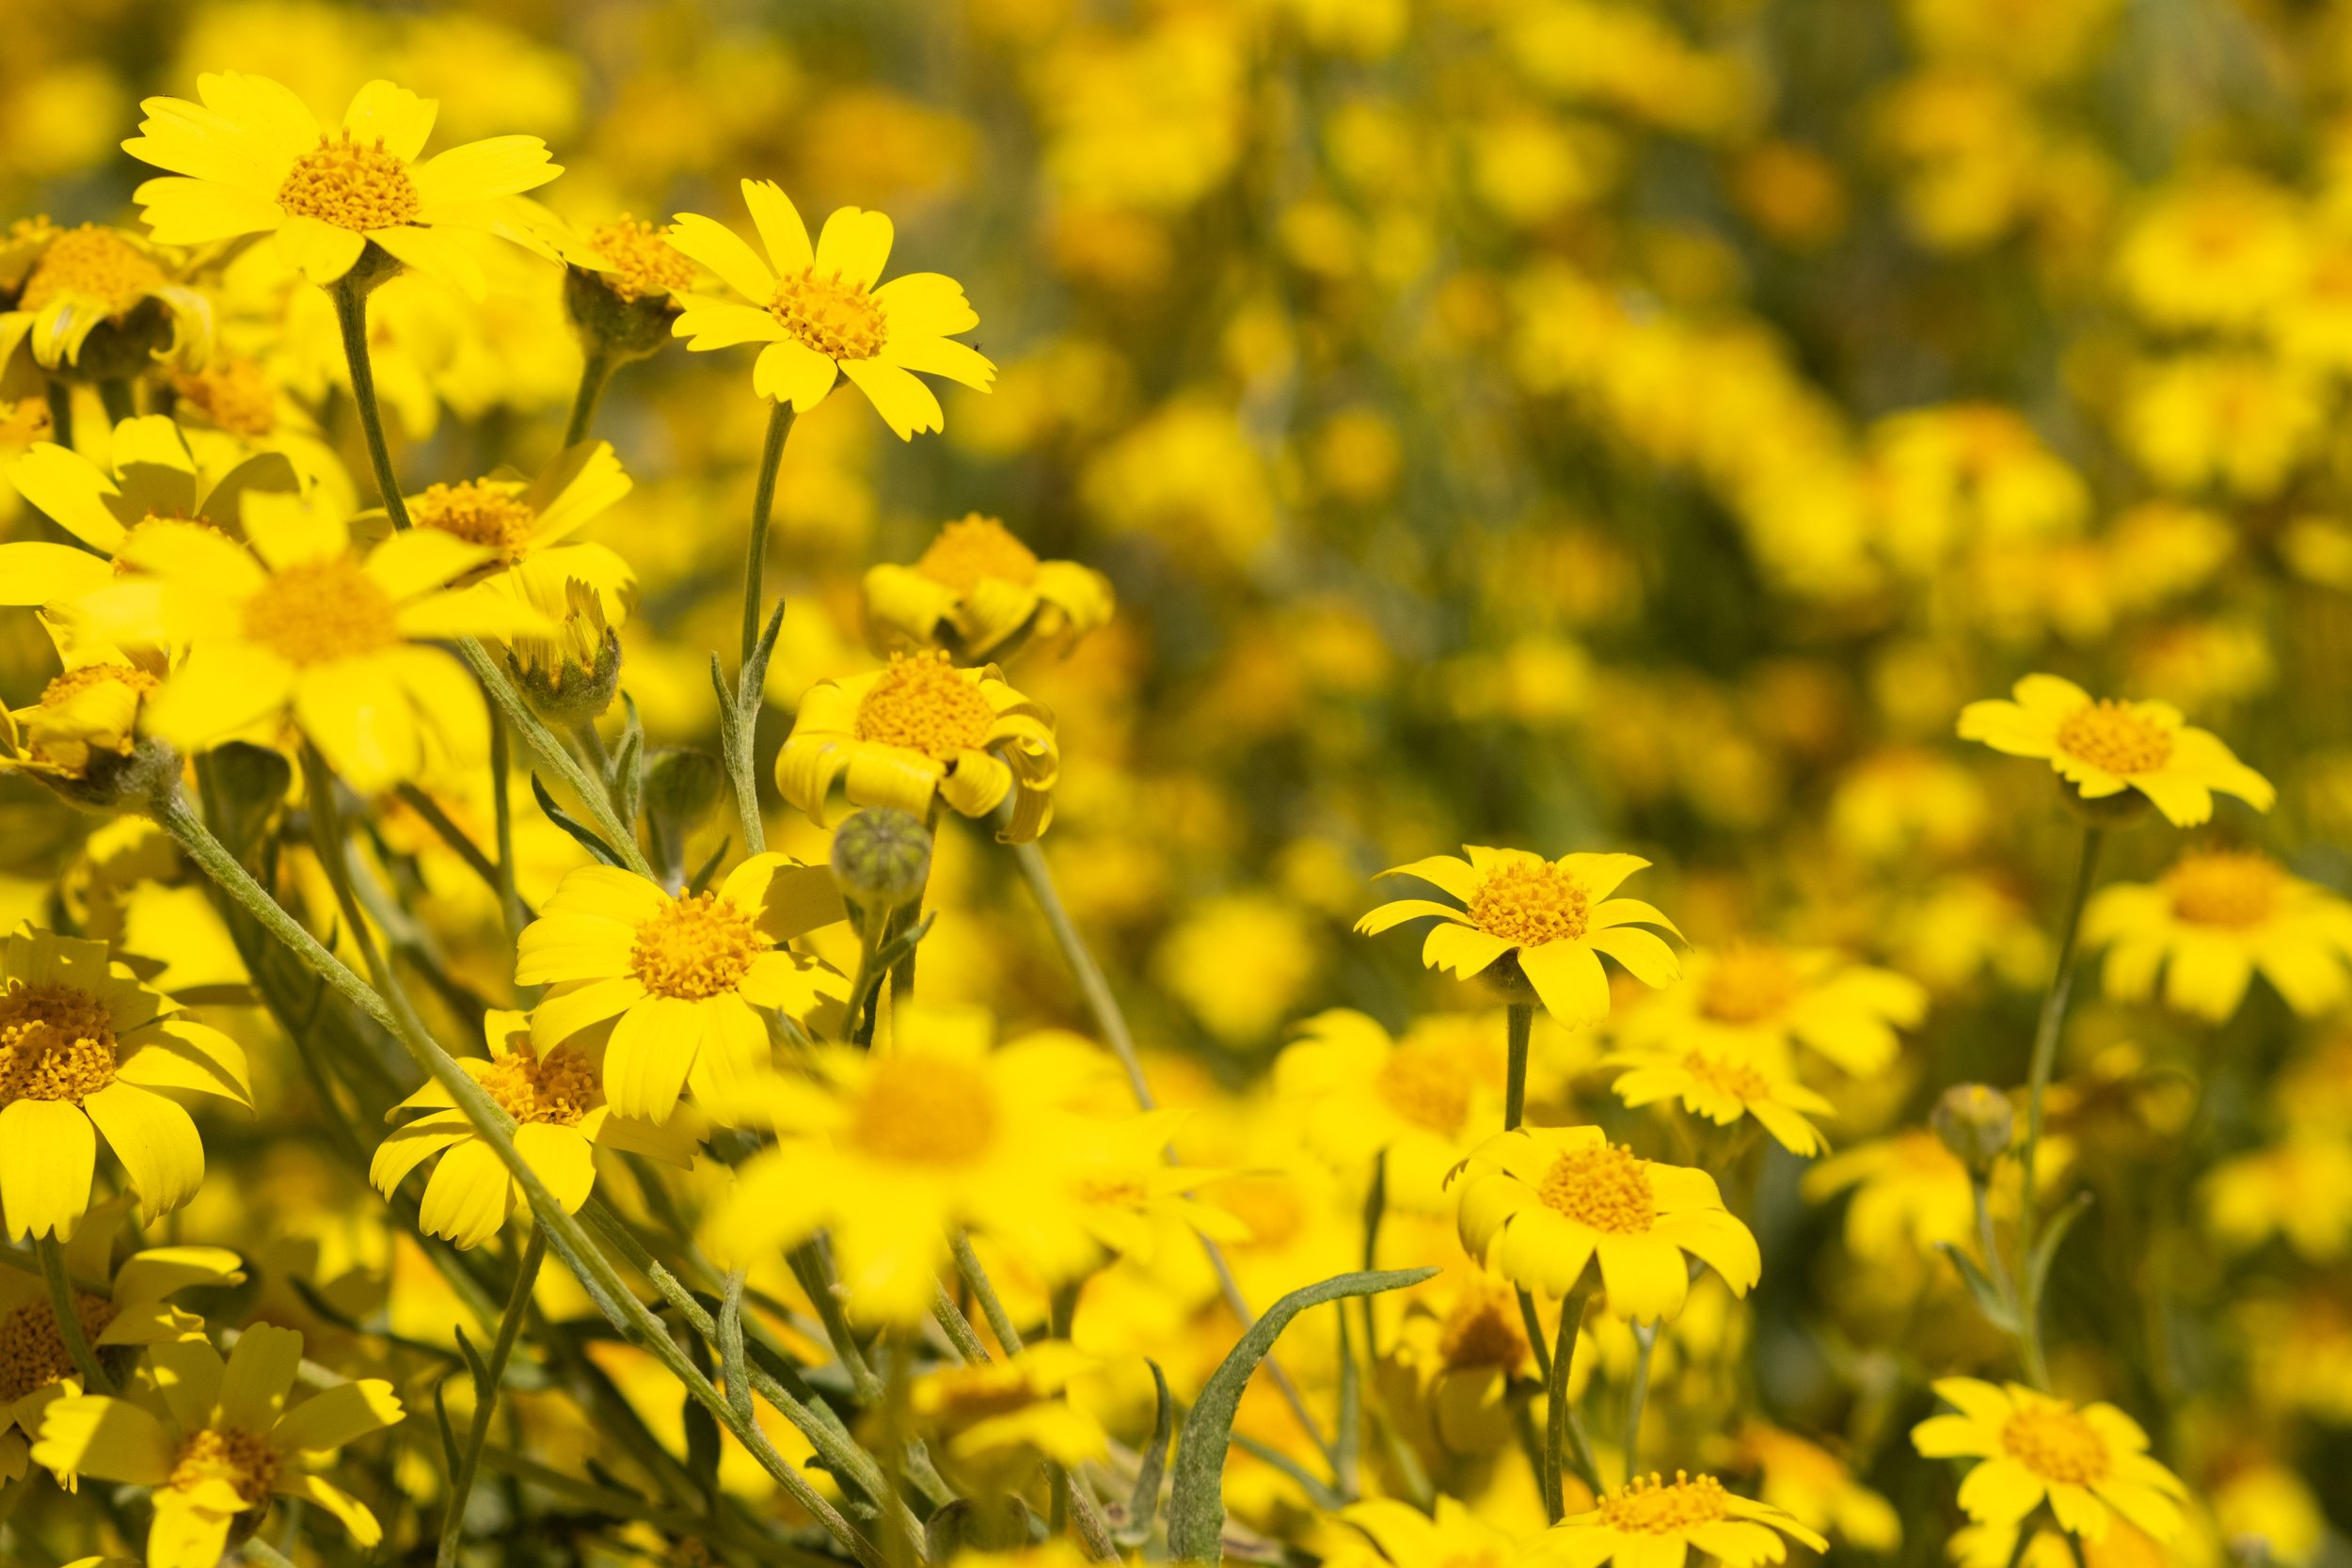  A close up of Bigelow’s coreopsis (Leptosyne bigelovii), which are blooming profusely in Carrizo Plain National Monument in Santa Margarita, Calif. on Monday, April 24th, 2023. Soda Lake Road runs through the middle and offers an easy way to see the